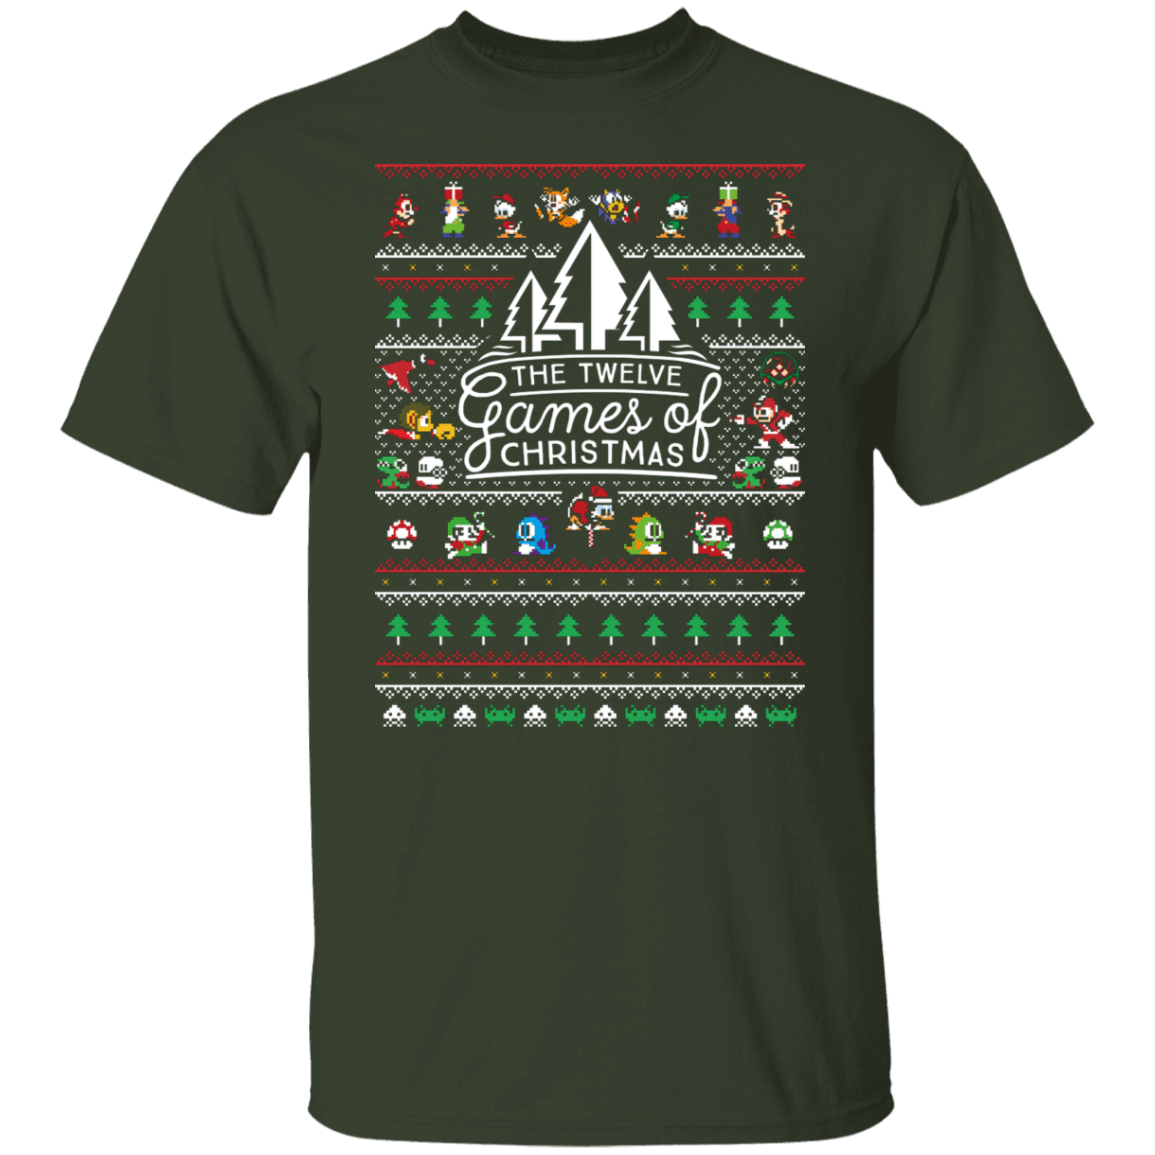 T-Shirts Forest / S 12 Games of Christmas T-Shirt